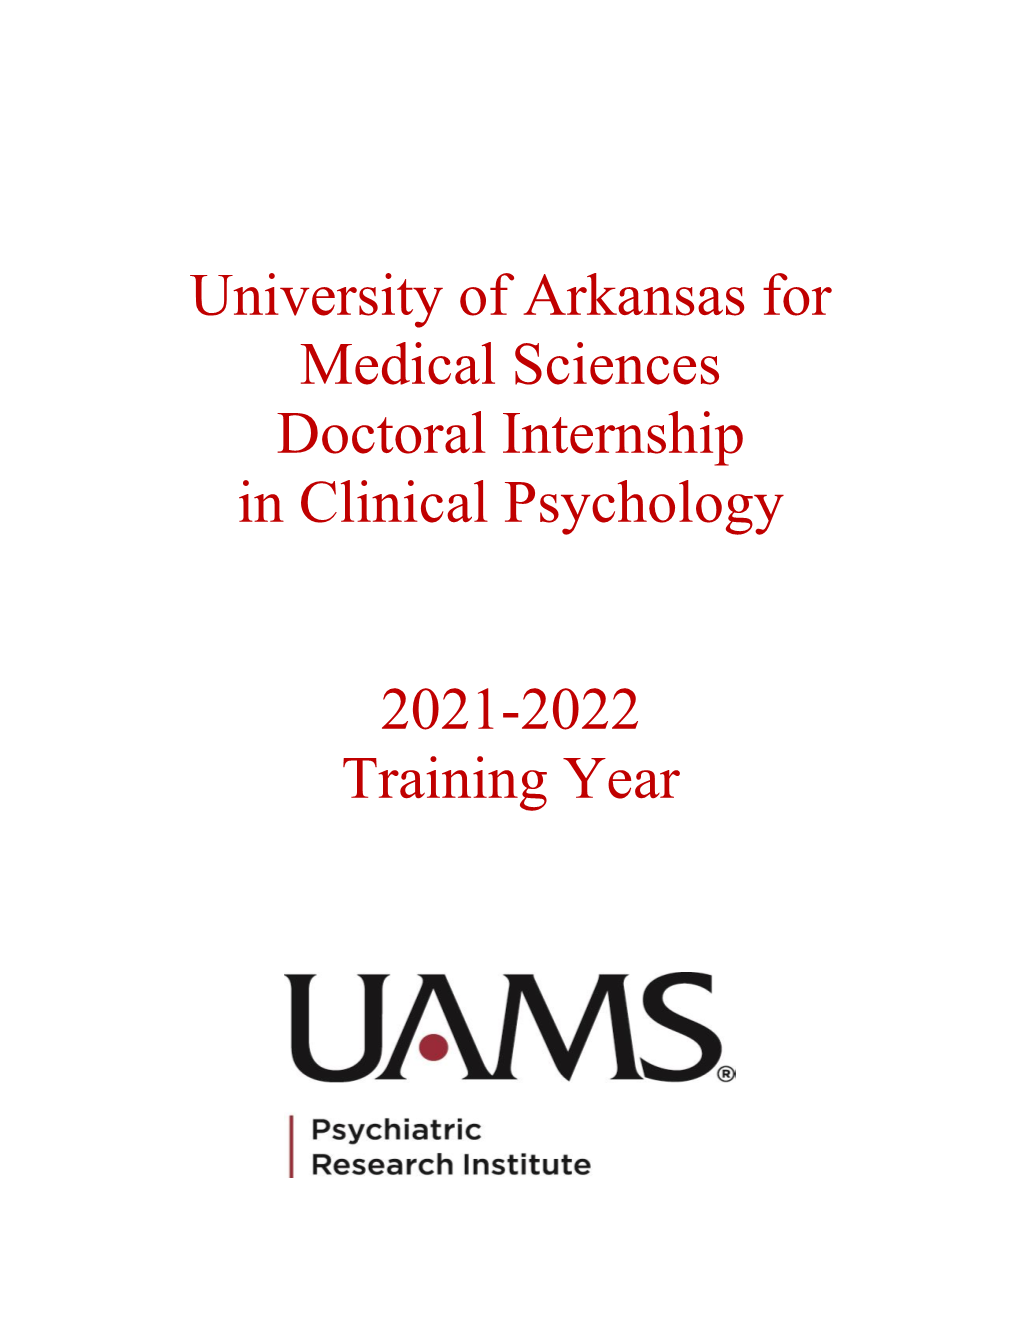 University of Arkansas for Medical Sciences Doctoral Internship in Clinical Psychology